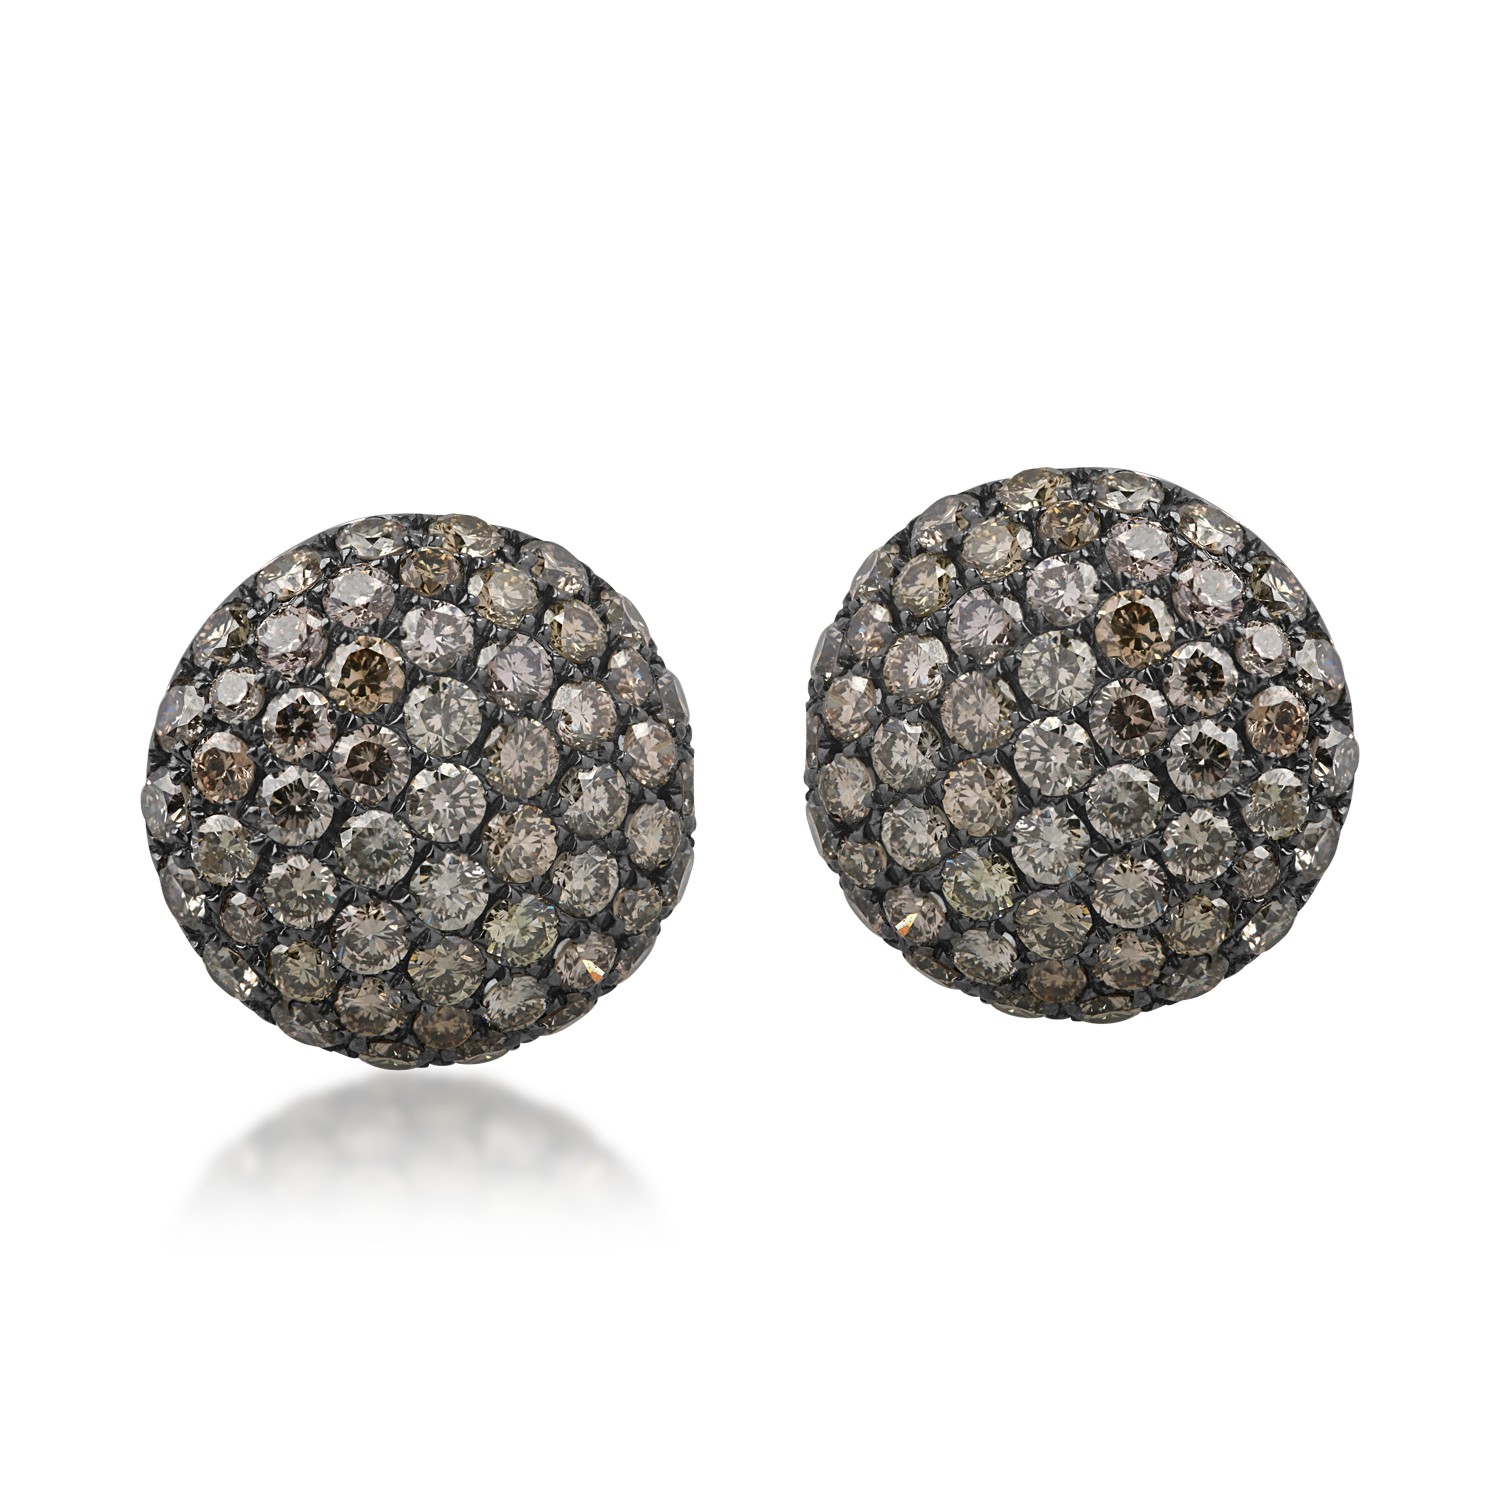 White gold stud earrings with 1.2ct brown diamonds